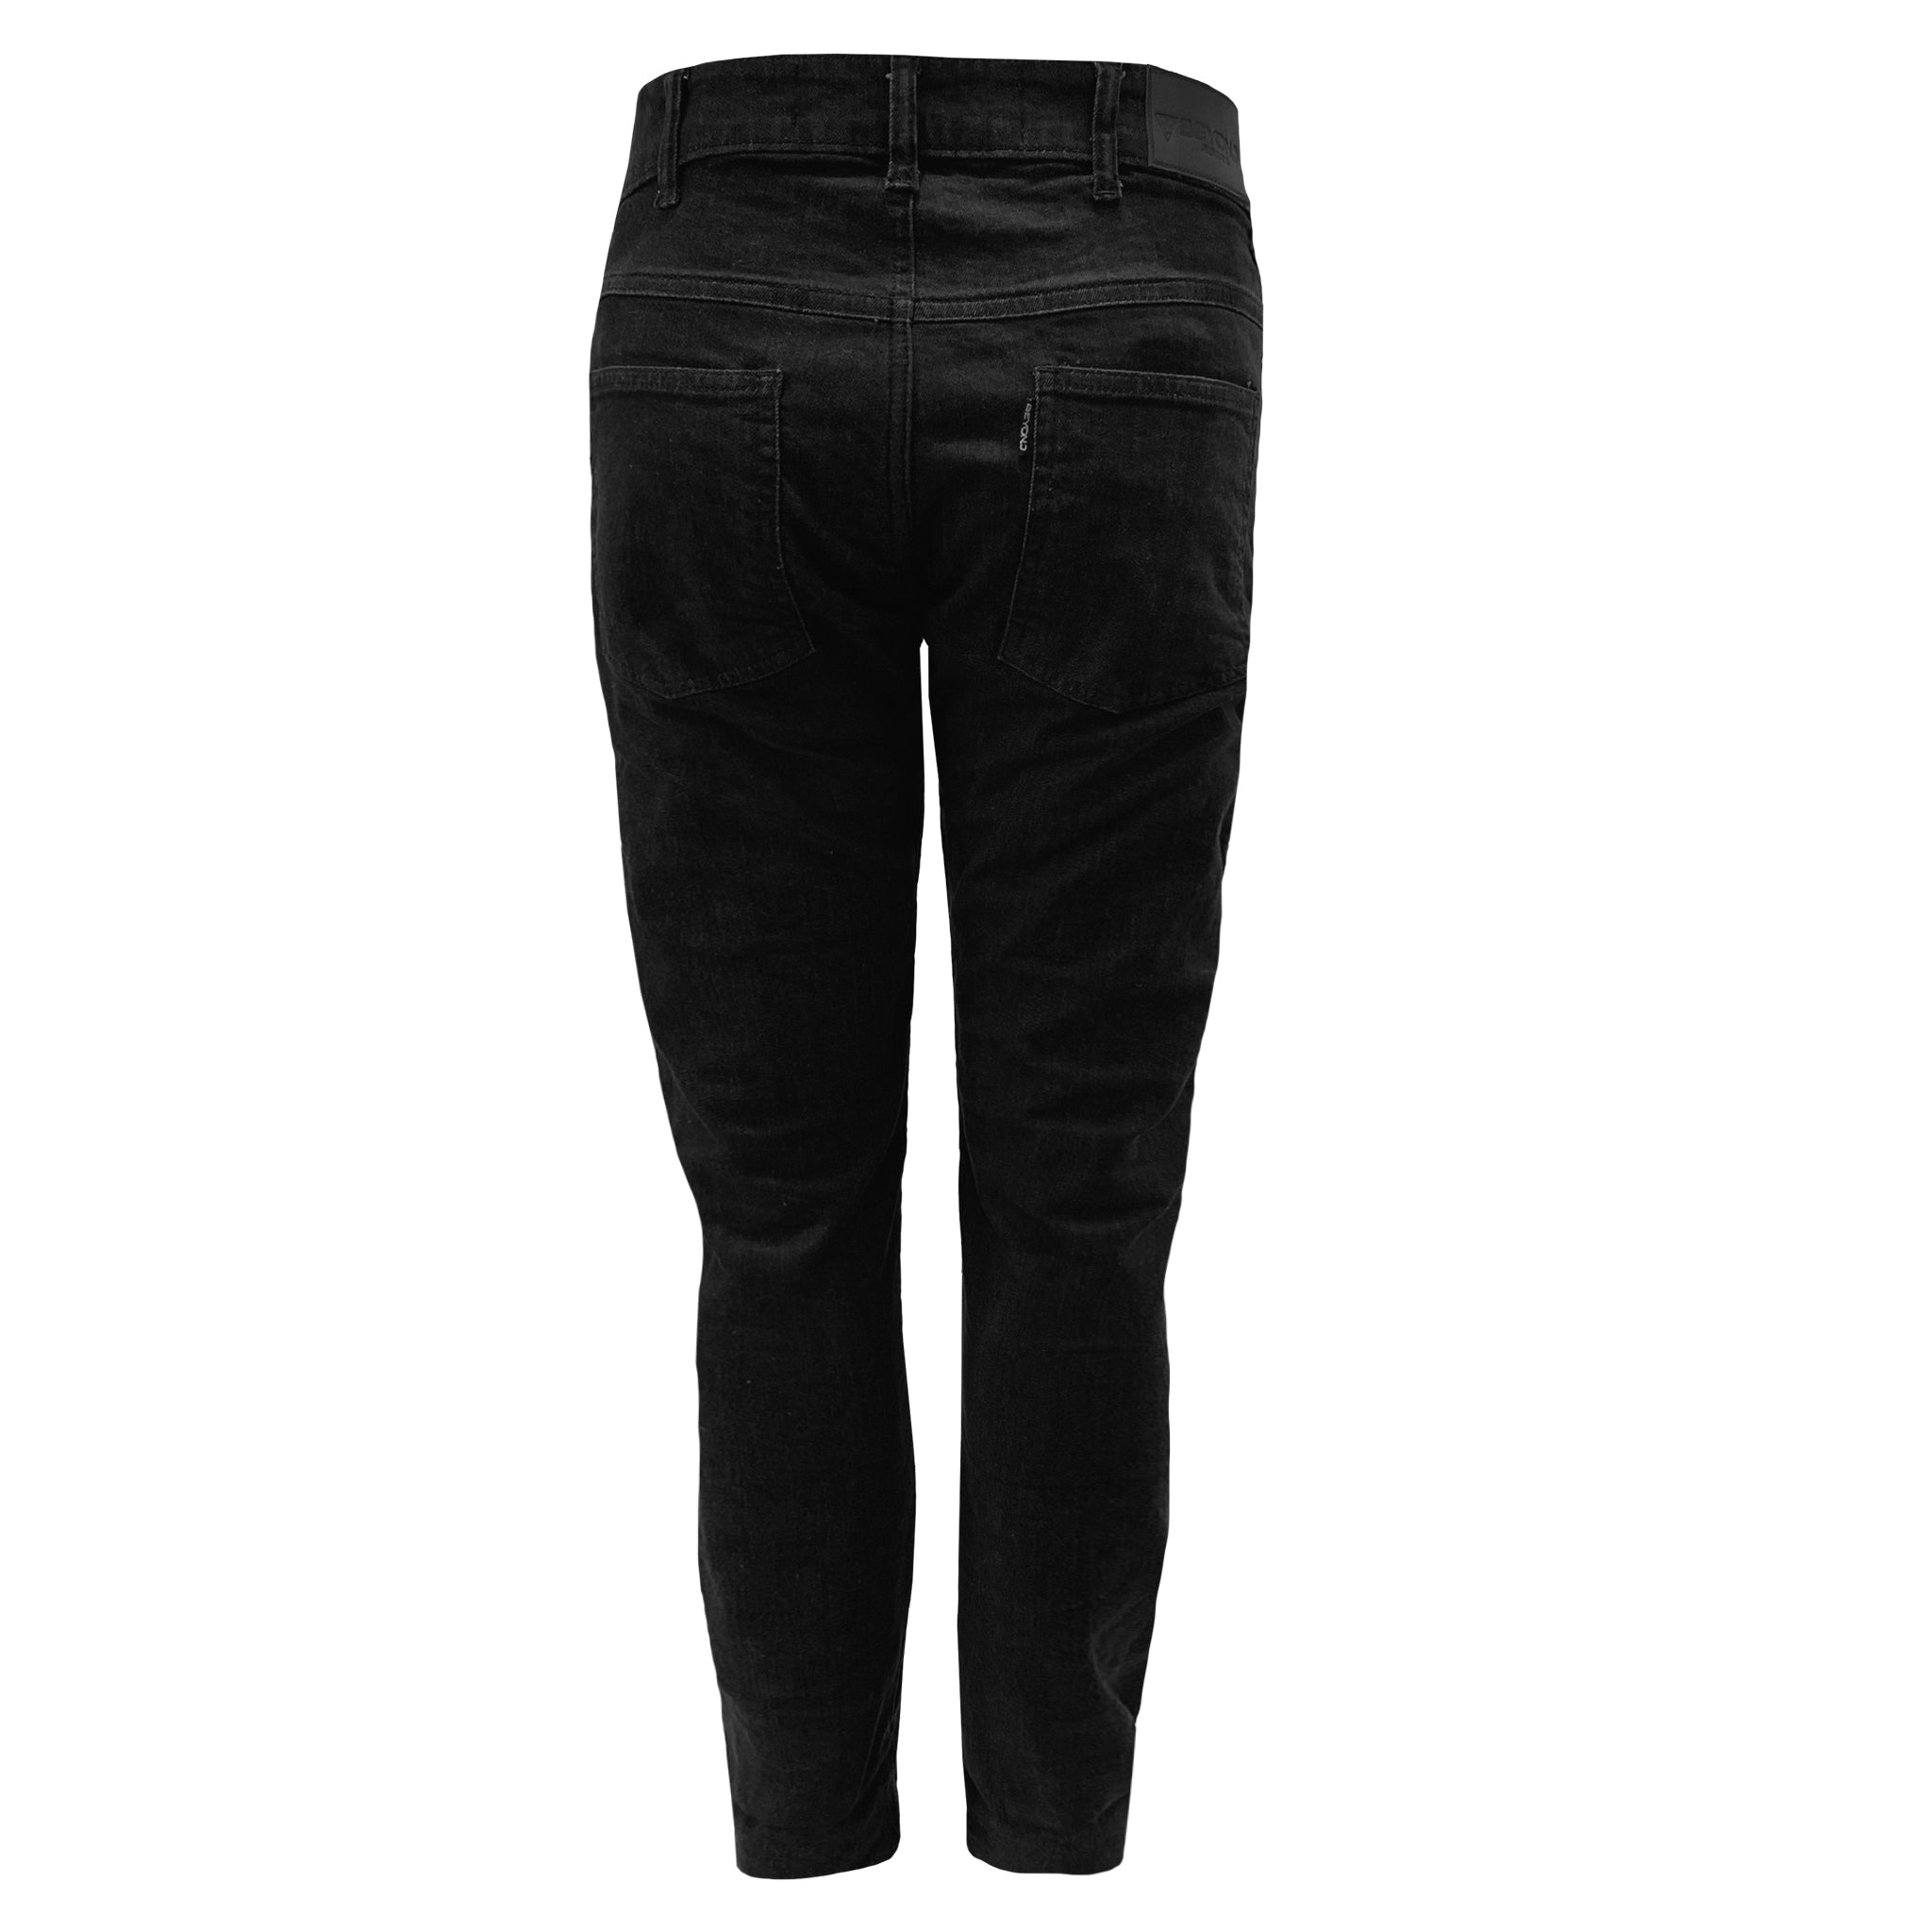 Straight Leg Protective Jeans for Women - Black with Pads